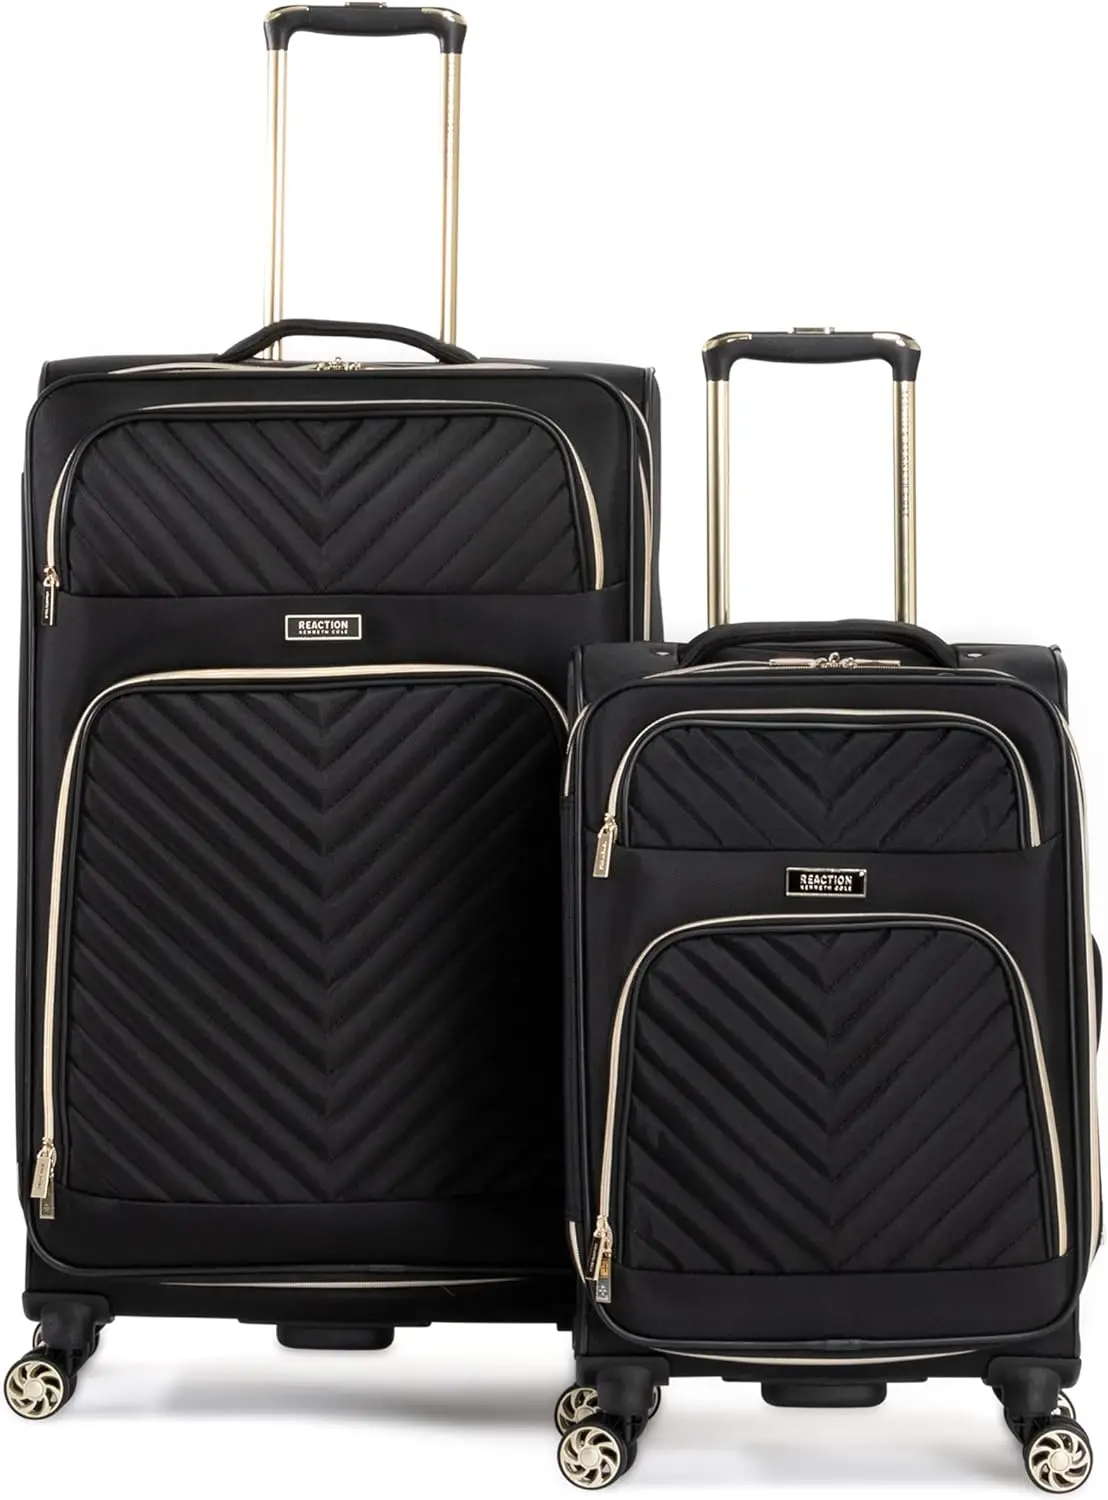 

Kenneth Cole REACTION Chelsea Chevron Quilted Luggage, Black, 2-Piece Set (20"/28")